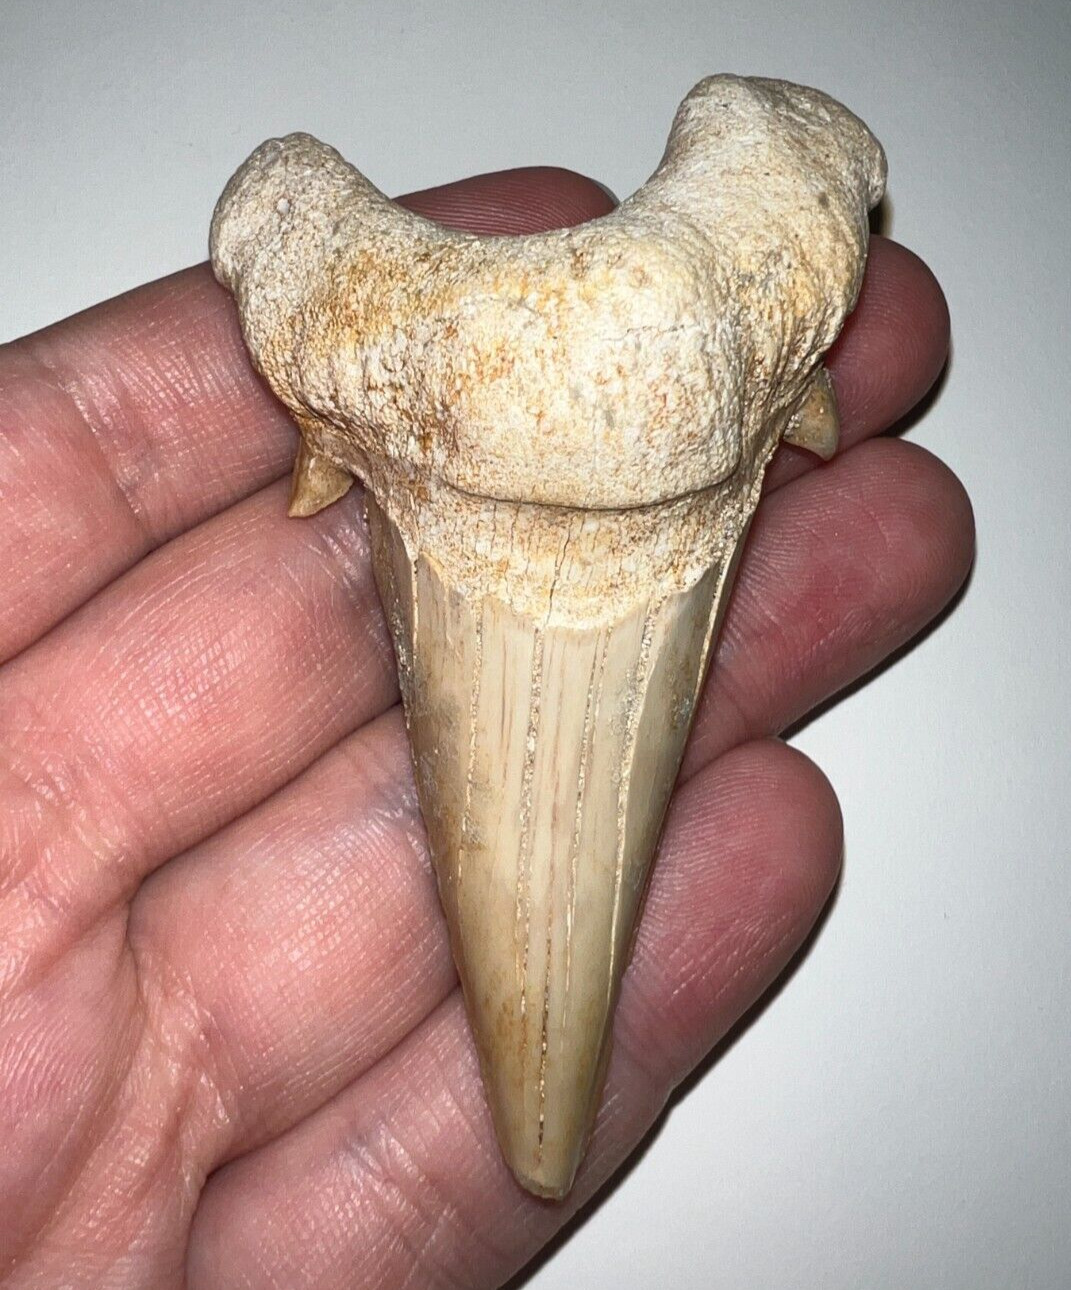 MONSTER OTODUS OBLIQUUS Fossil Shark Tooth 3+ INCHES MEGALODON ANCESTOR NO REP